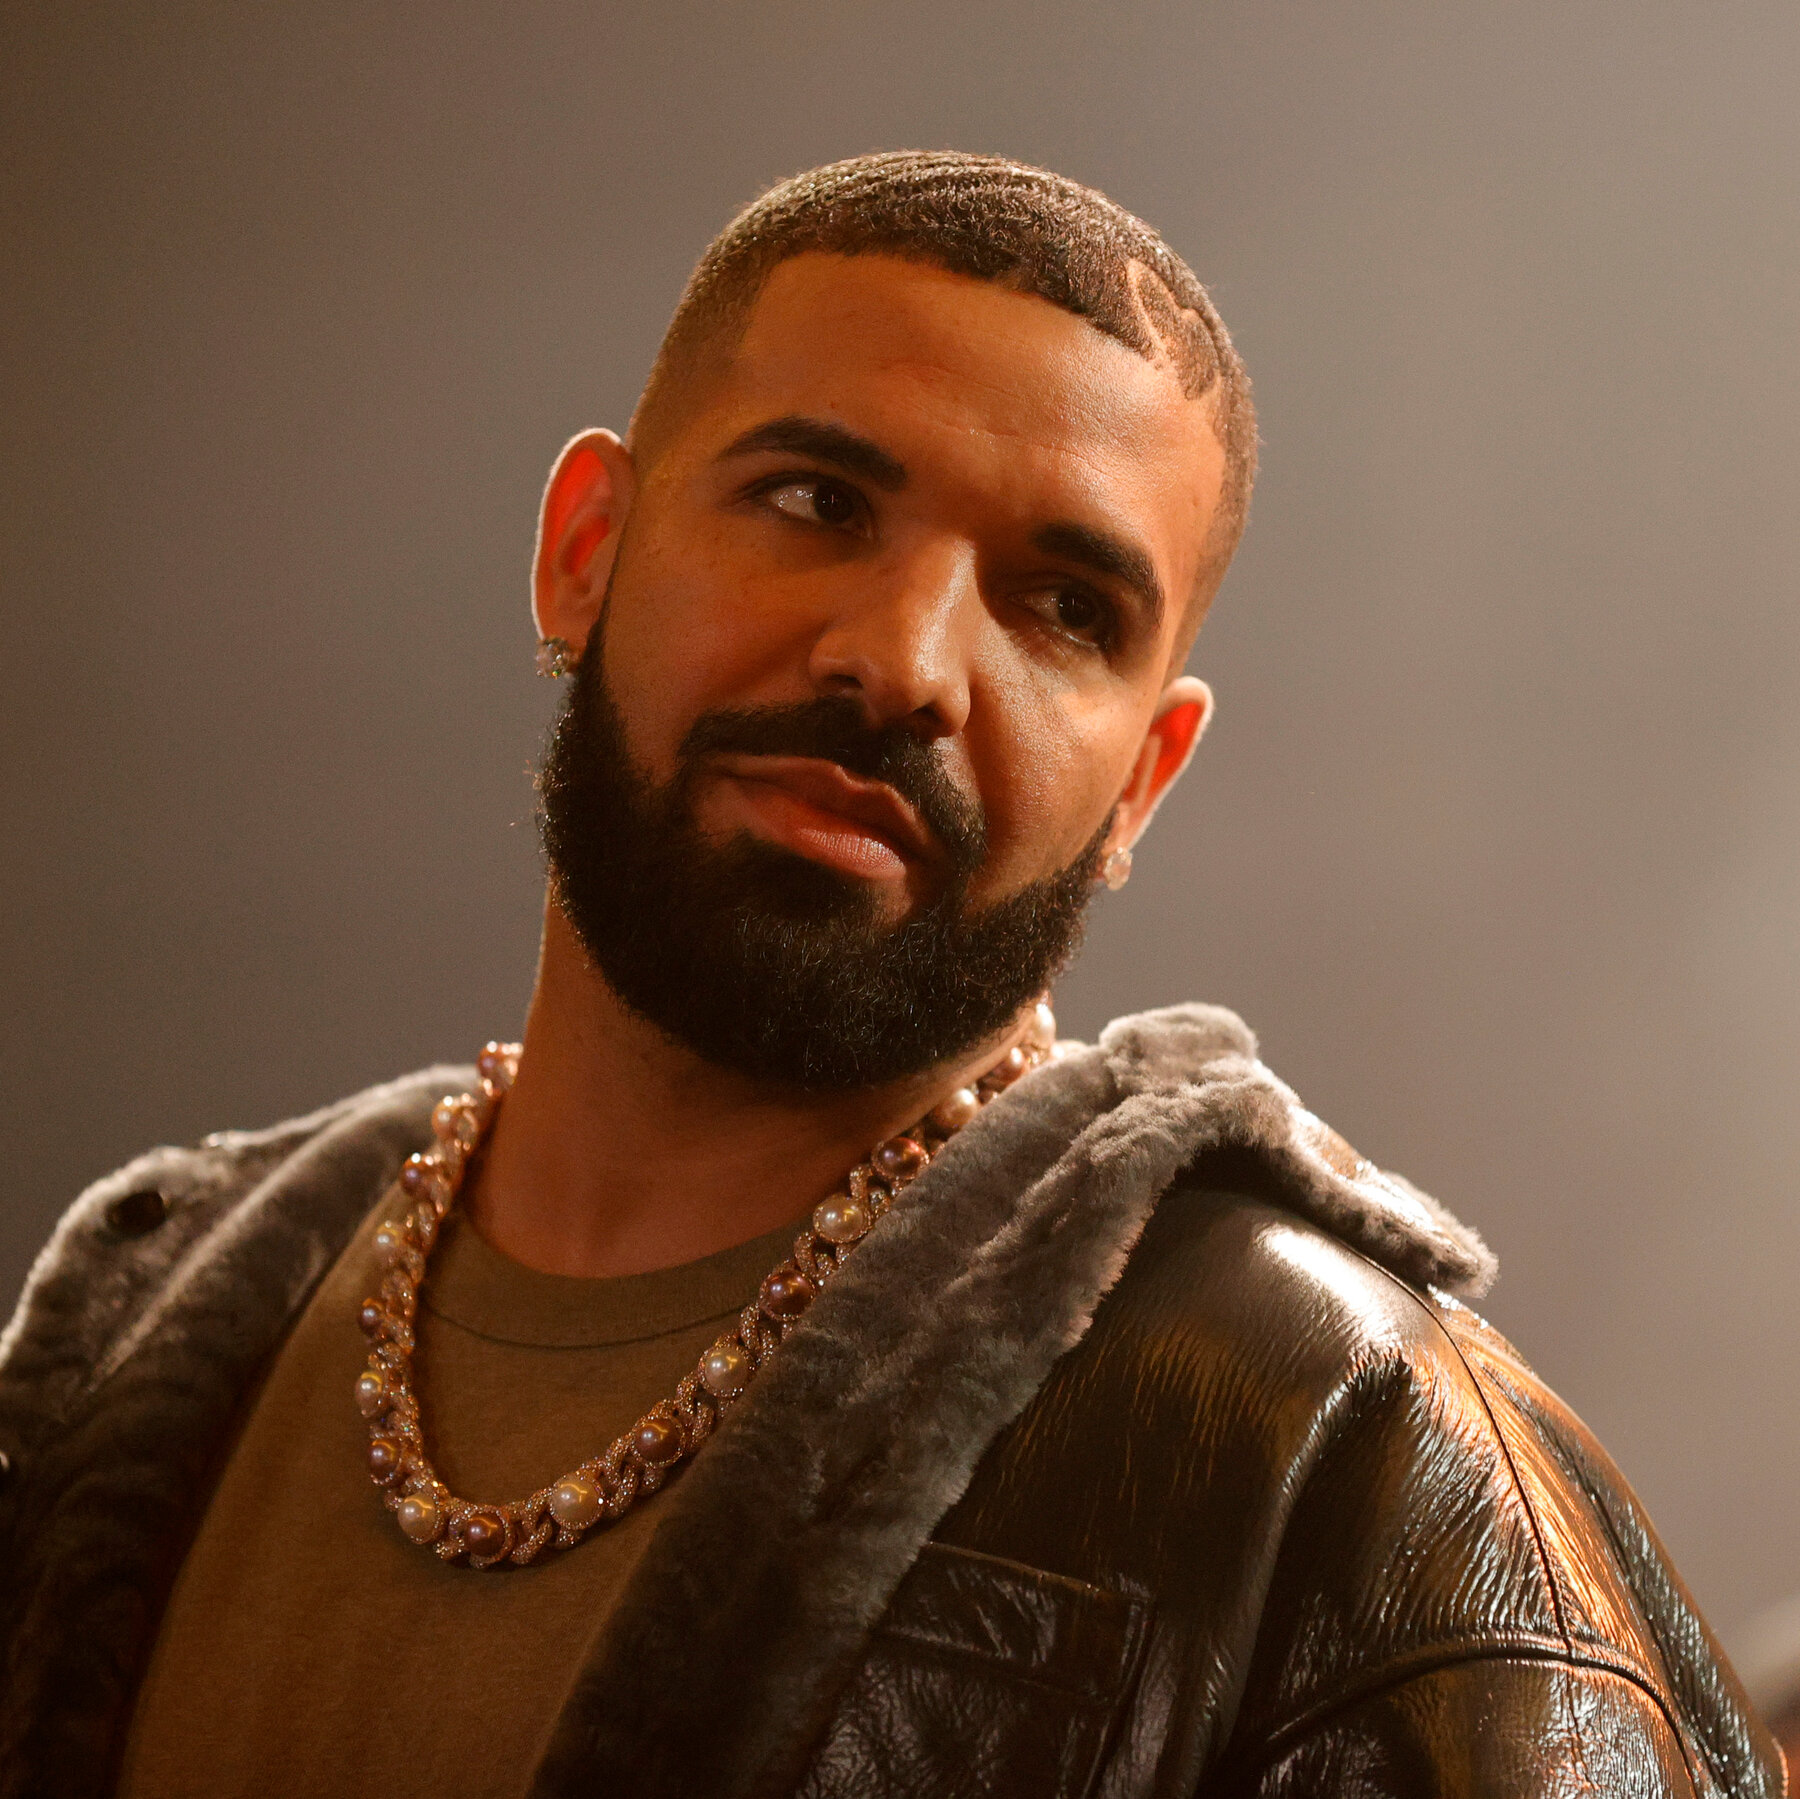 Drake to take break from music career due to worrying health issue